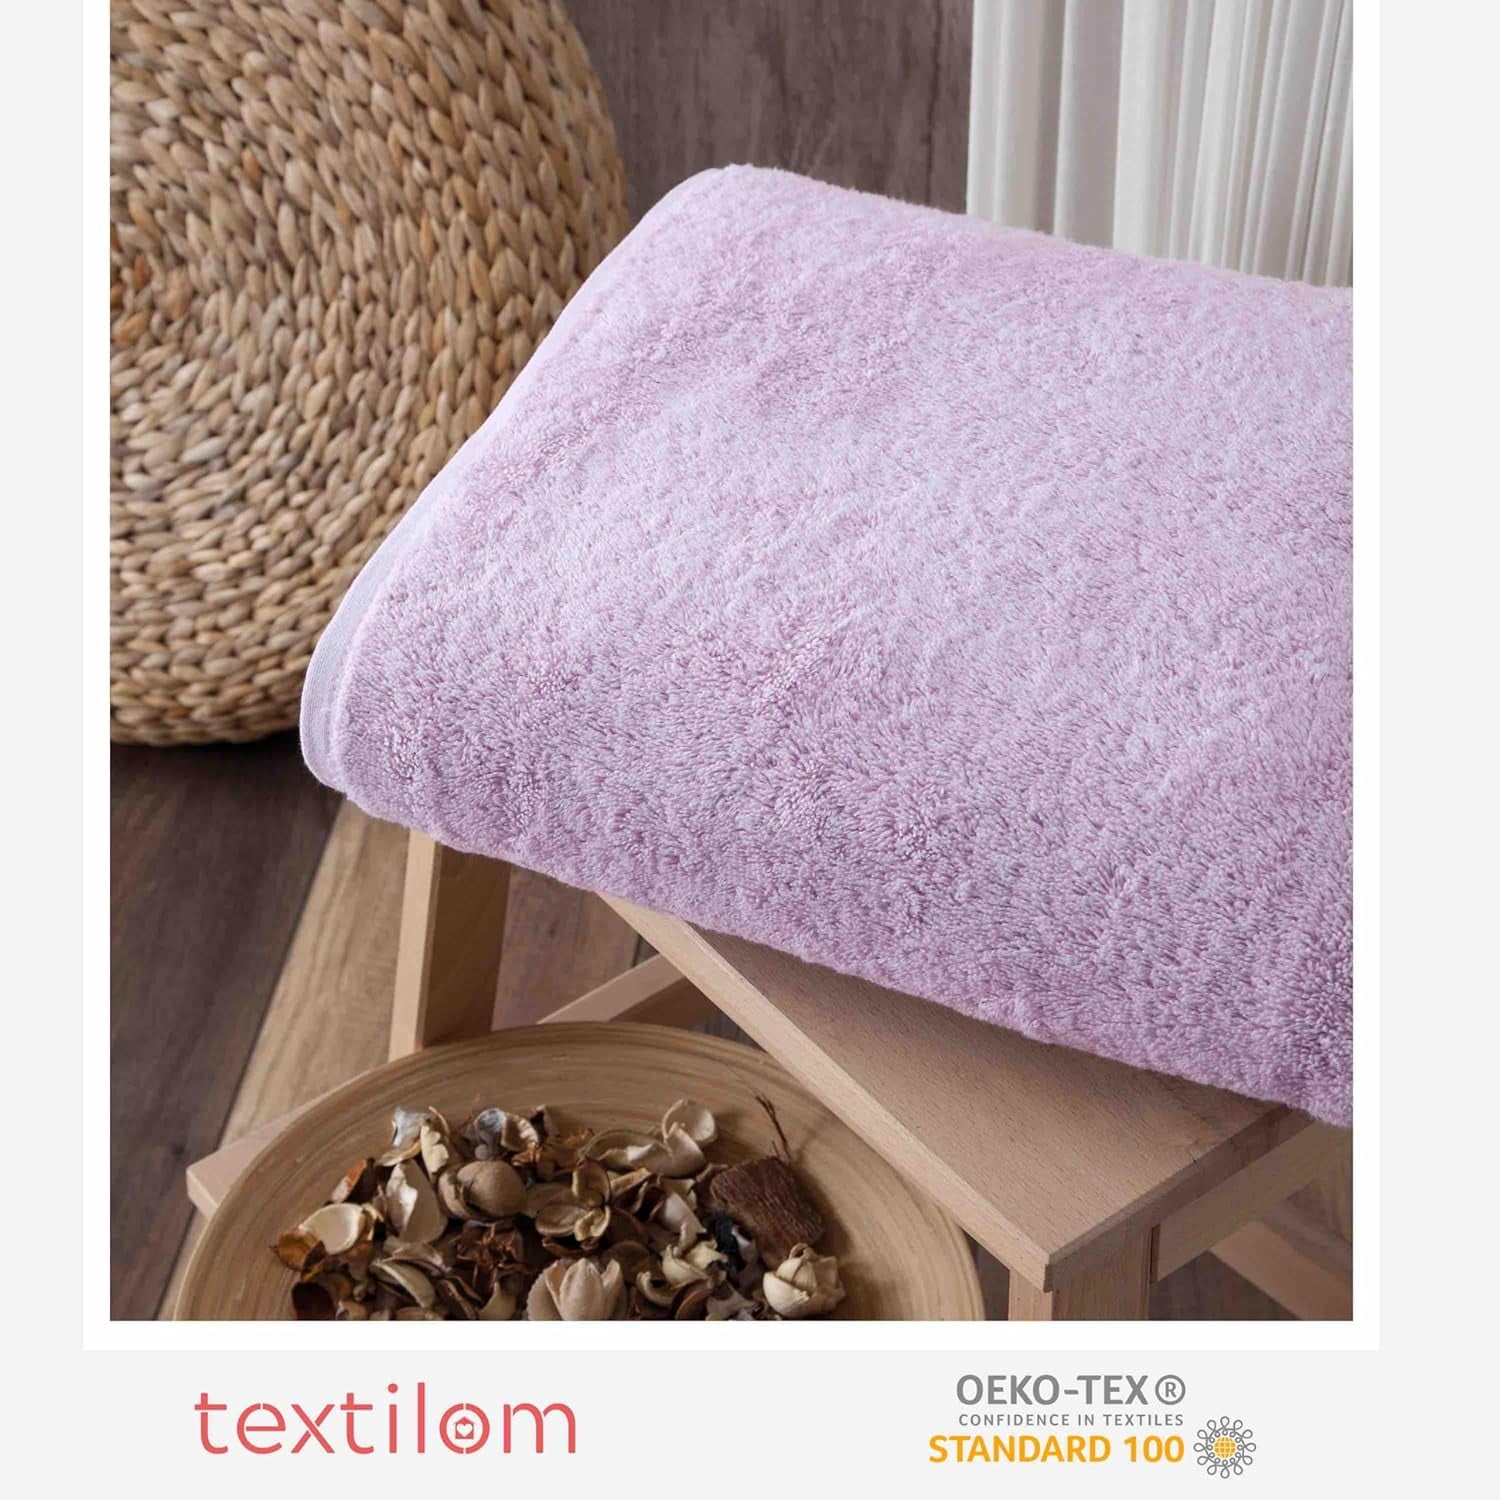 Homerican Oversized Bath Towels Extra Large - Fluffy & Soft Oversized  Turkish Bath Sheet - Quick Dry, Absorbent & Machine-Washable Cotton Towels  for Bathroom, Hotel or Spa - 40x80, 600 GSM Terracotta